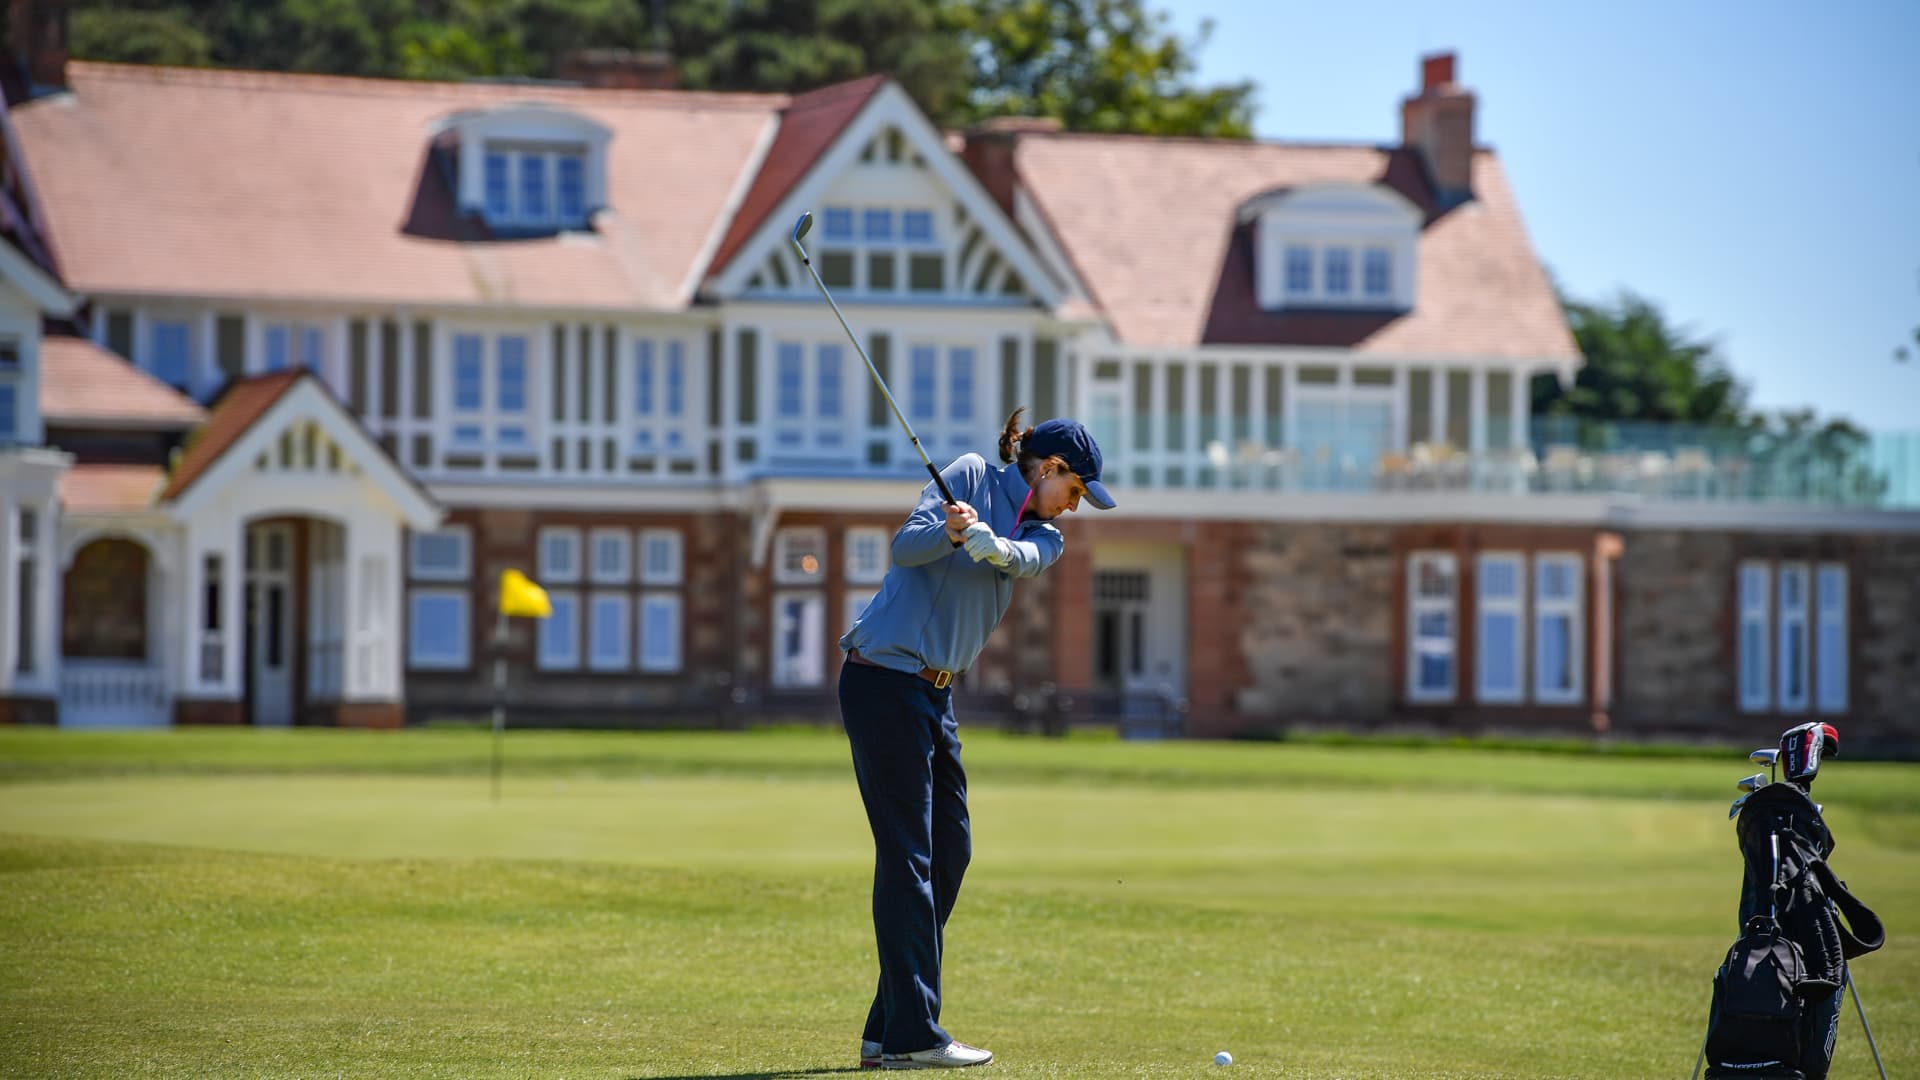 A woman plays golf at Muirfield, Scotland, in 2019, as the club opened its doors to women for the first time. It will host the Women's Open Championship in August.